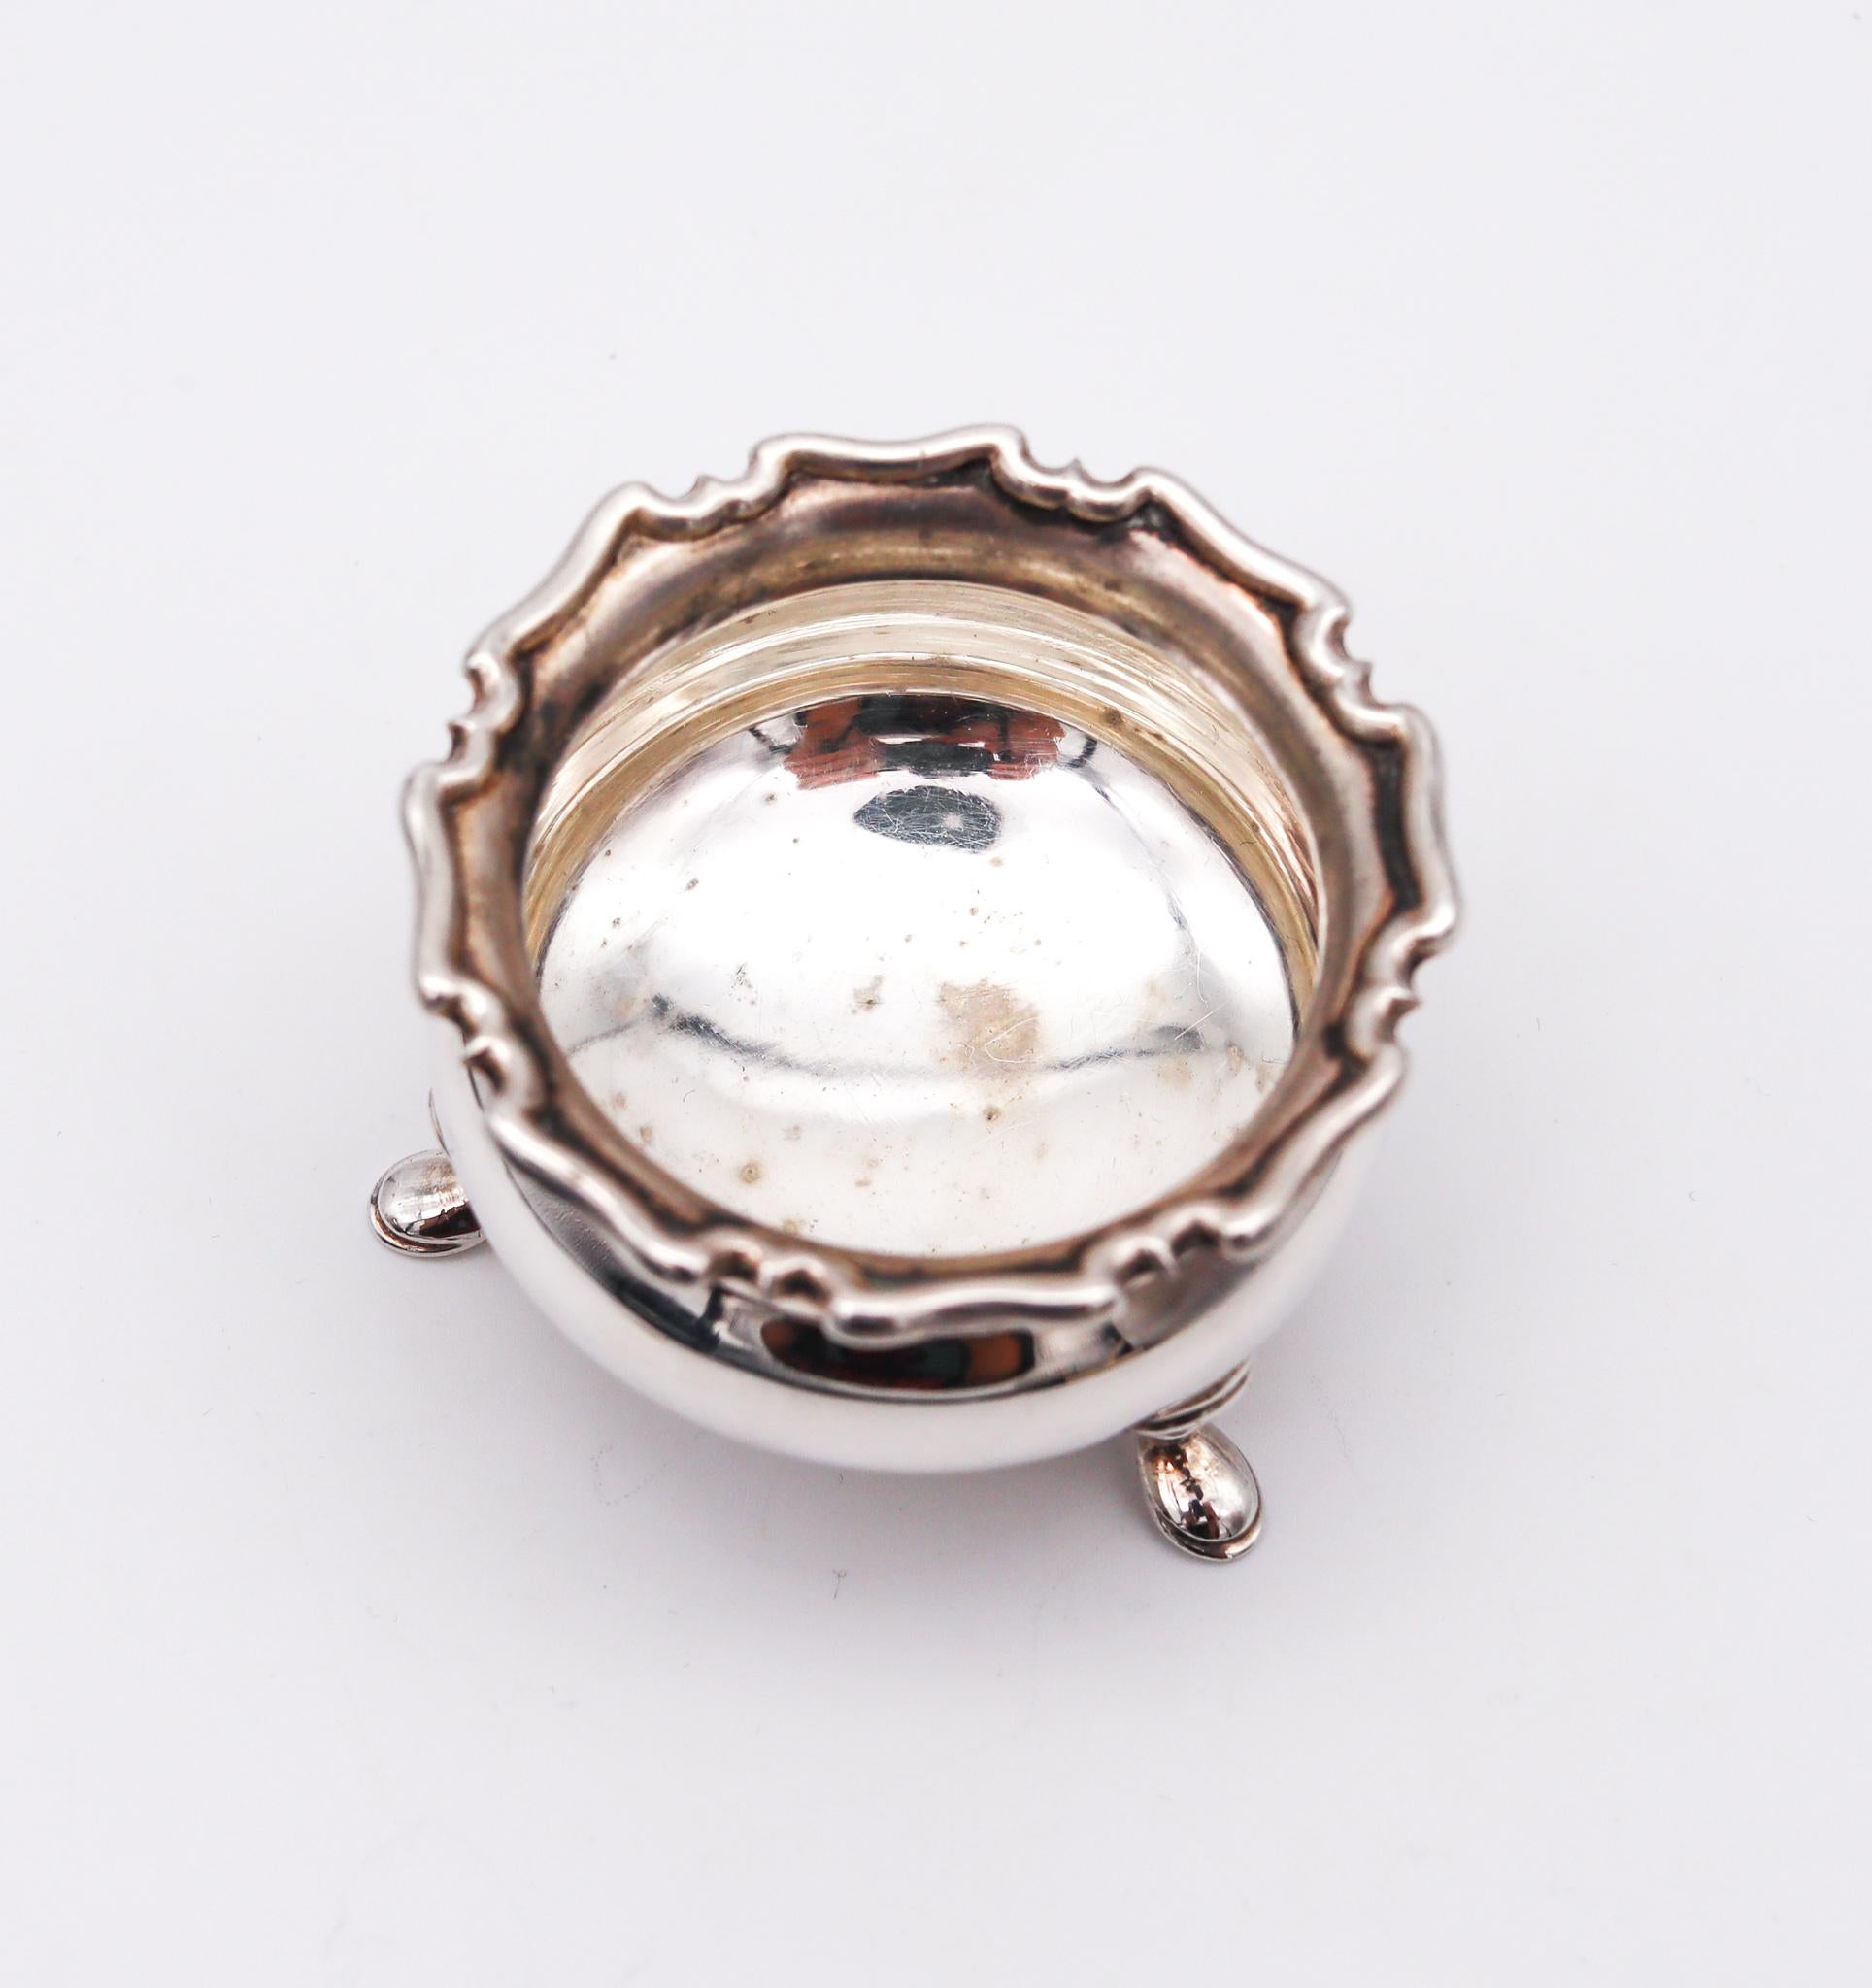 Art Nouveau Atkin Brothers England 1912 Sheffield Salt Cellar with Spoon 925 Sterling Silver For Sale